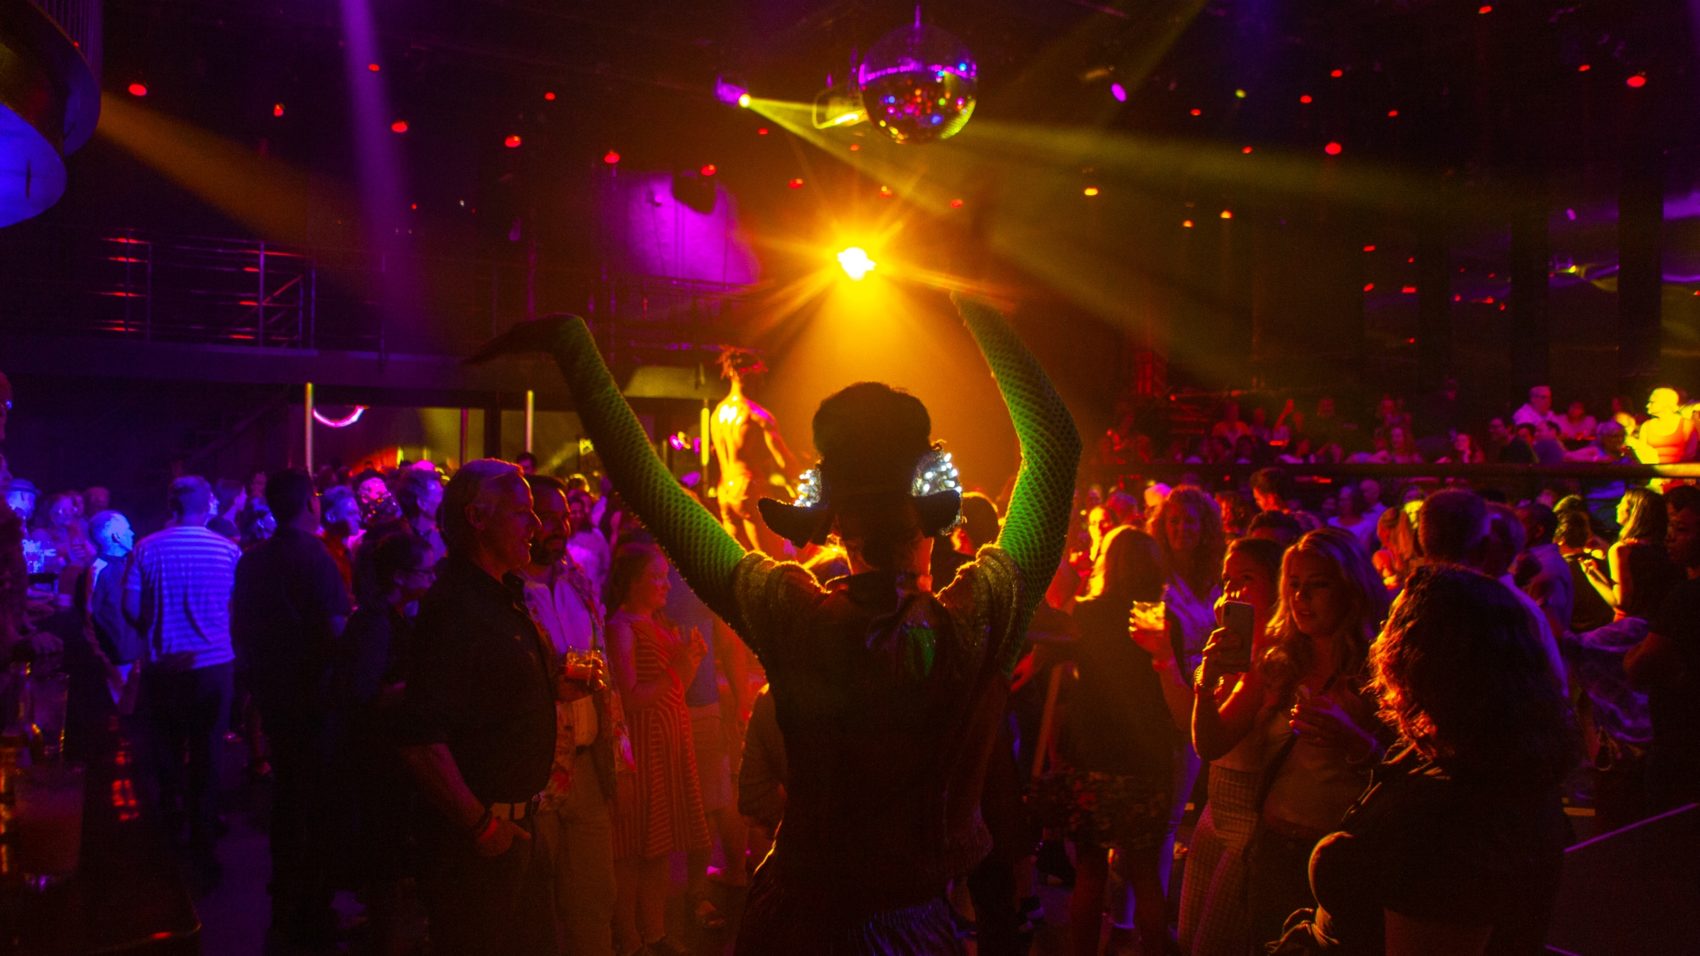 Photos: Inside 'The Donkey Show' As It Prepares To Spin Its Last ...